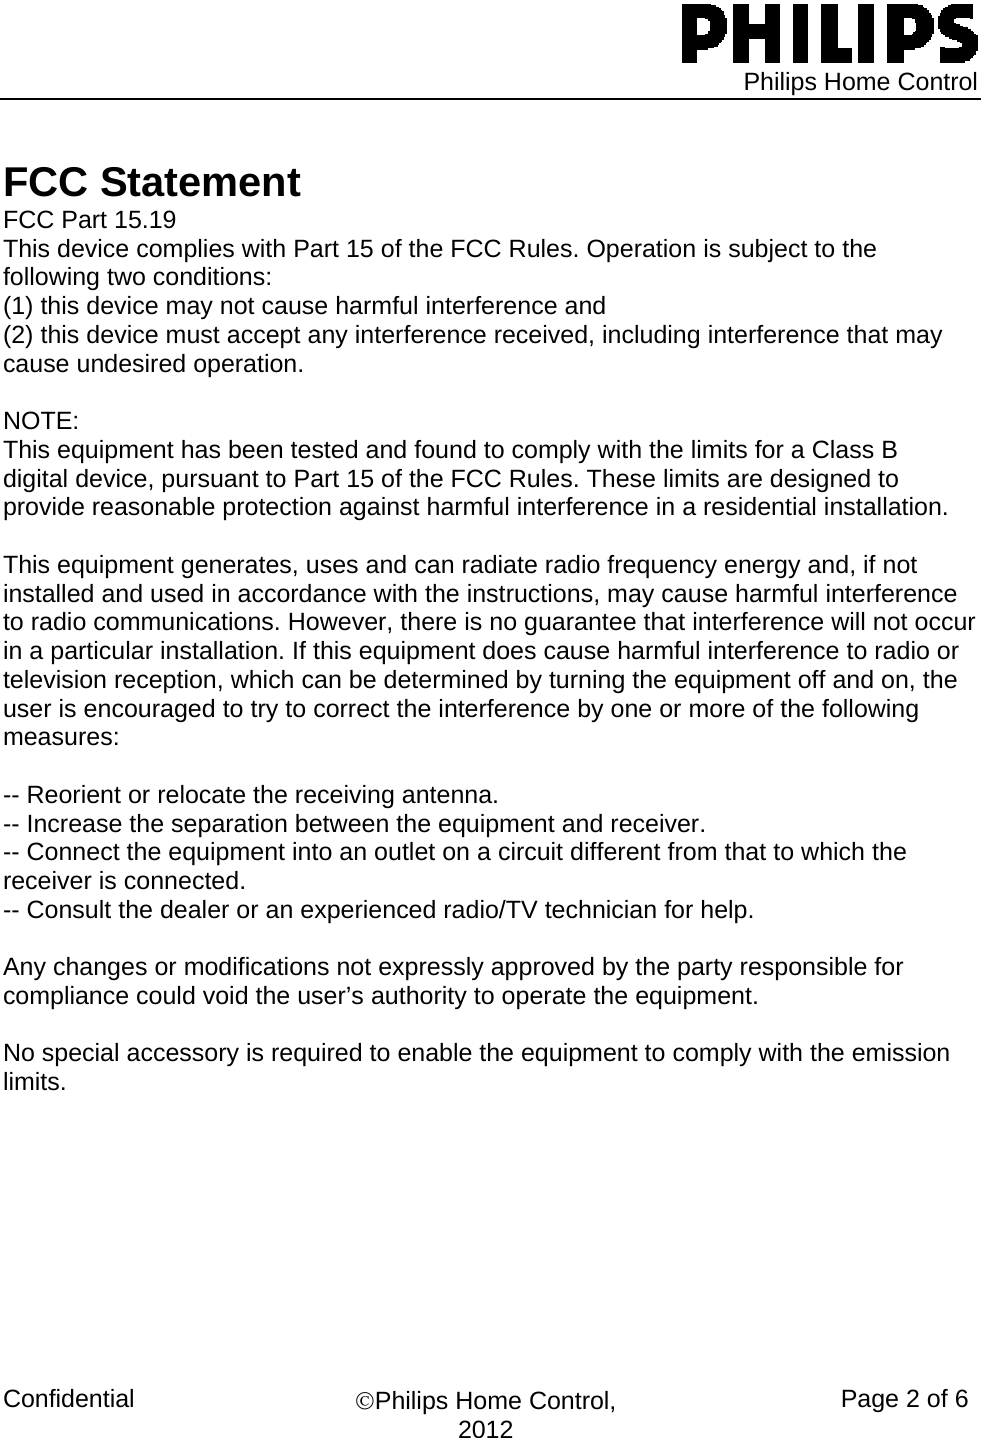   Philips Home Control Confidential  ©Philips Home Control, 2012 Page 2 of 6   FCC Statement FCC Part 15.19 This device complies with Part 15 of the FCC Rules. Operation is subject to the following two conditions:  (1) this device may not cause harmful interference and  (2) this device must accept any interference received, including interference that may cause undesired operation.  NOTE:  This equipment has been tested and found to comply with the limits for a Class B digital device, pursuant to Part 15 of the FCC Rules. These limits are designed to provide reasonable protection against harmful interference in a residential installation.   This equipment generates, uses and can radiate radio frequency energy and, if not installed and used in accordance with the instructions, may cause harmful interference to radio communications. However, there is no guarantee that interference will not occur in a particular installation. If this equipment does cause harmful interference to radio or television reception, which can be determined by turning the equipment off and on, the user is encouraged to try to correct the interference by one or more of the following measures:  -- Reorient or relocate the receiving antenna. -- Increase the separation between the equipment and receiver. -- Connect the equipment into an outlet on a circuit different from that to which the receiver is connected. -- Consult the dealer or an experienced radio/TV technician for help.  Any changes or modifications not expressly approved by the party responsible for compliance could void the user’s authority to operate the equipment.  No special accessory is required to enable the equipment to comply with the emission limits.                                